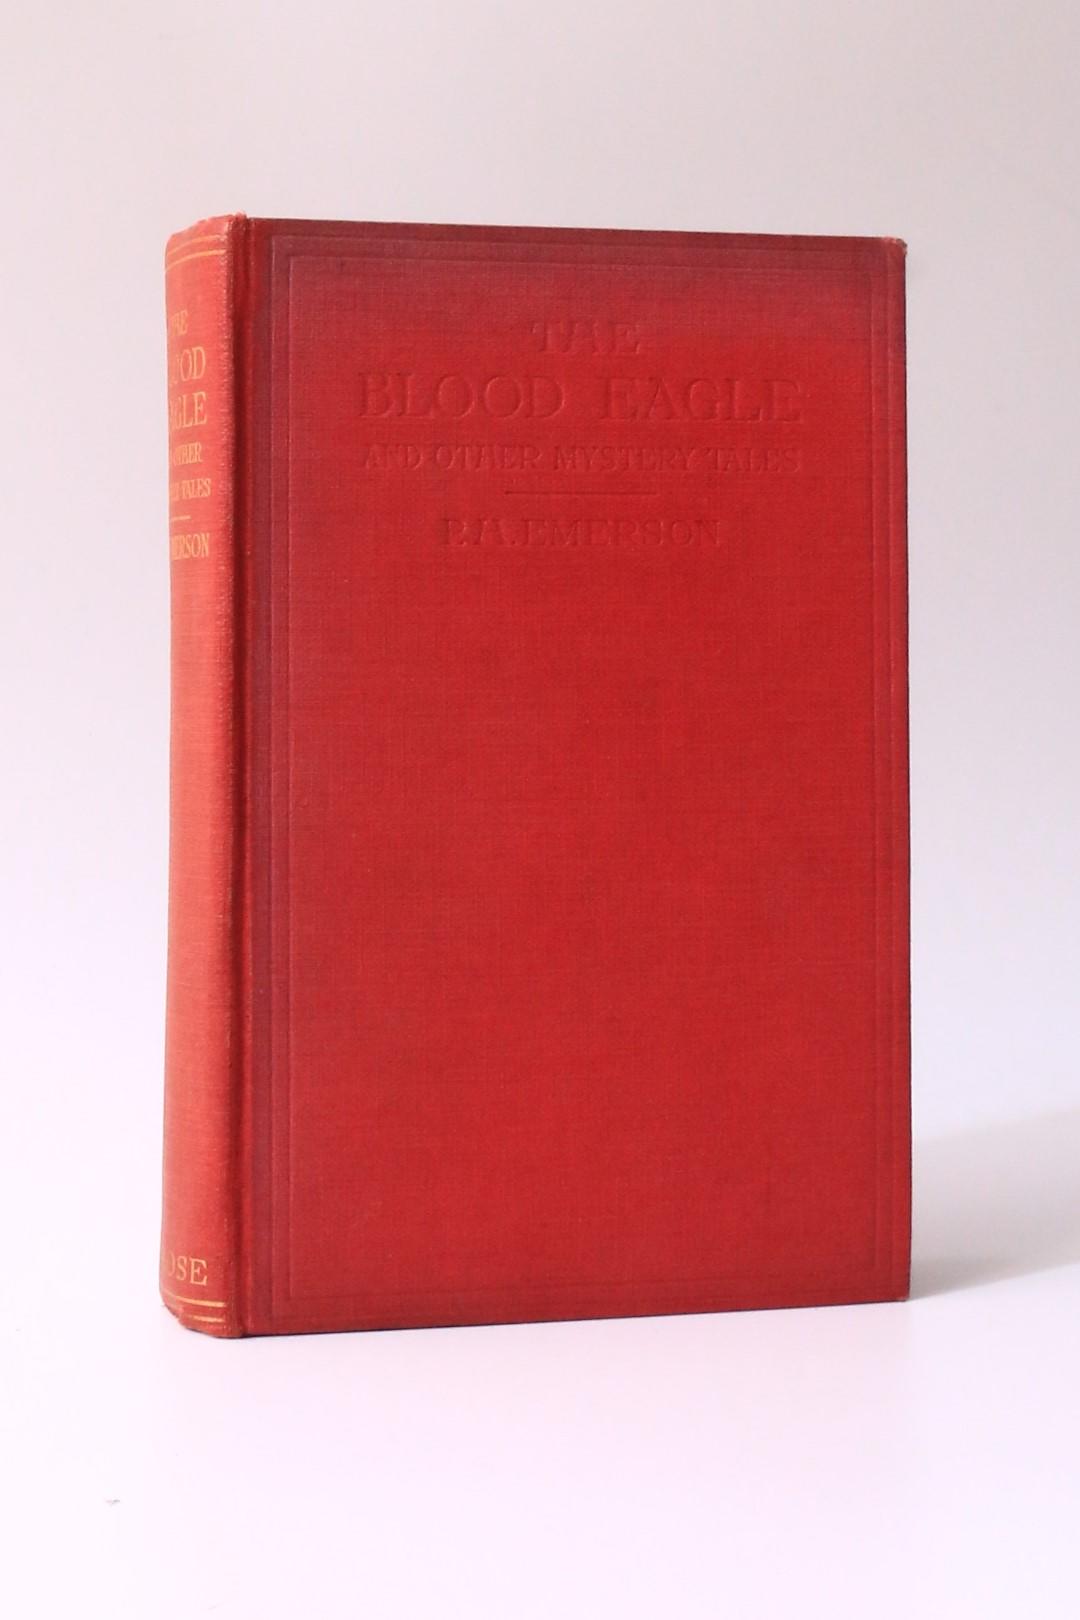 Peter Henry Emerson - The Blood Eagle and Other [Mystery] Tales - Author's Marked Up Copy - Andrew Melrose, 1925, First Edition.